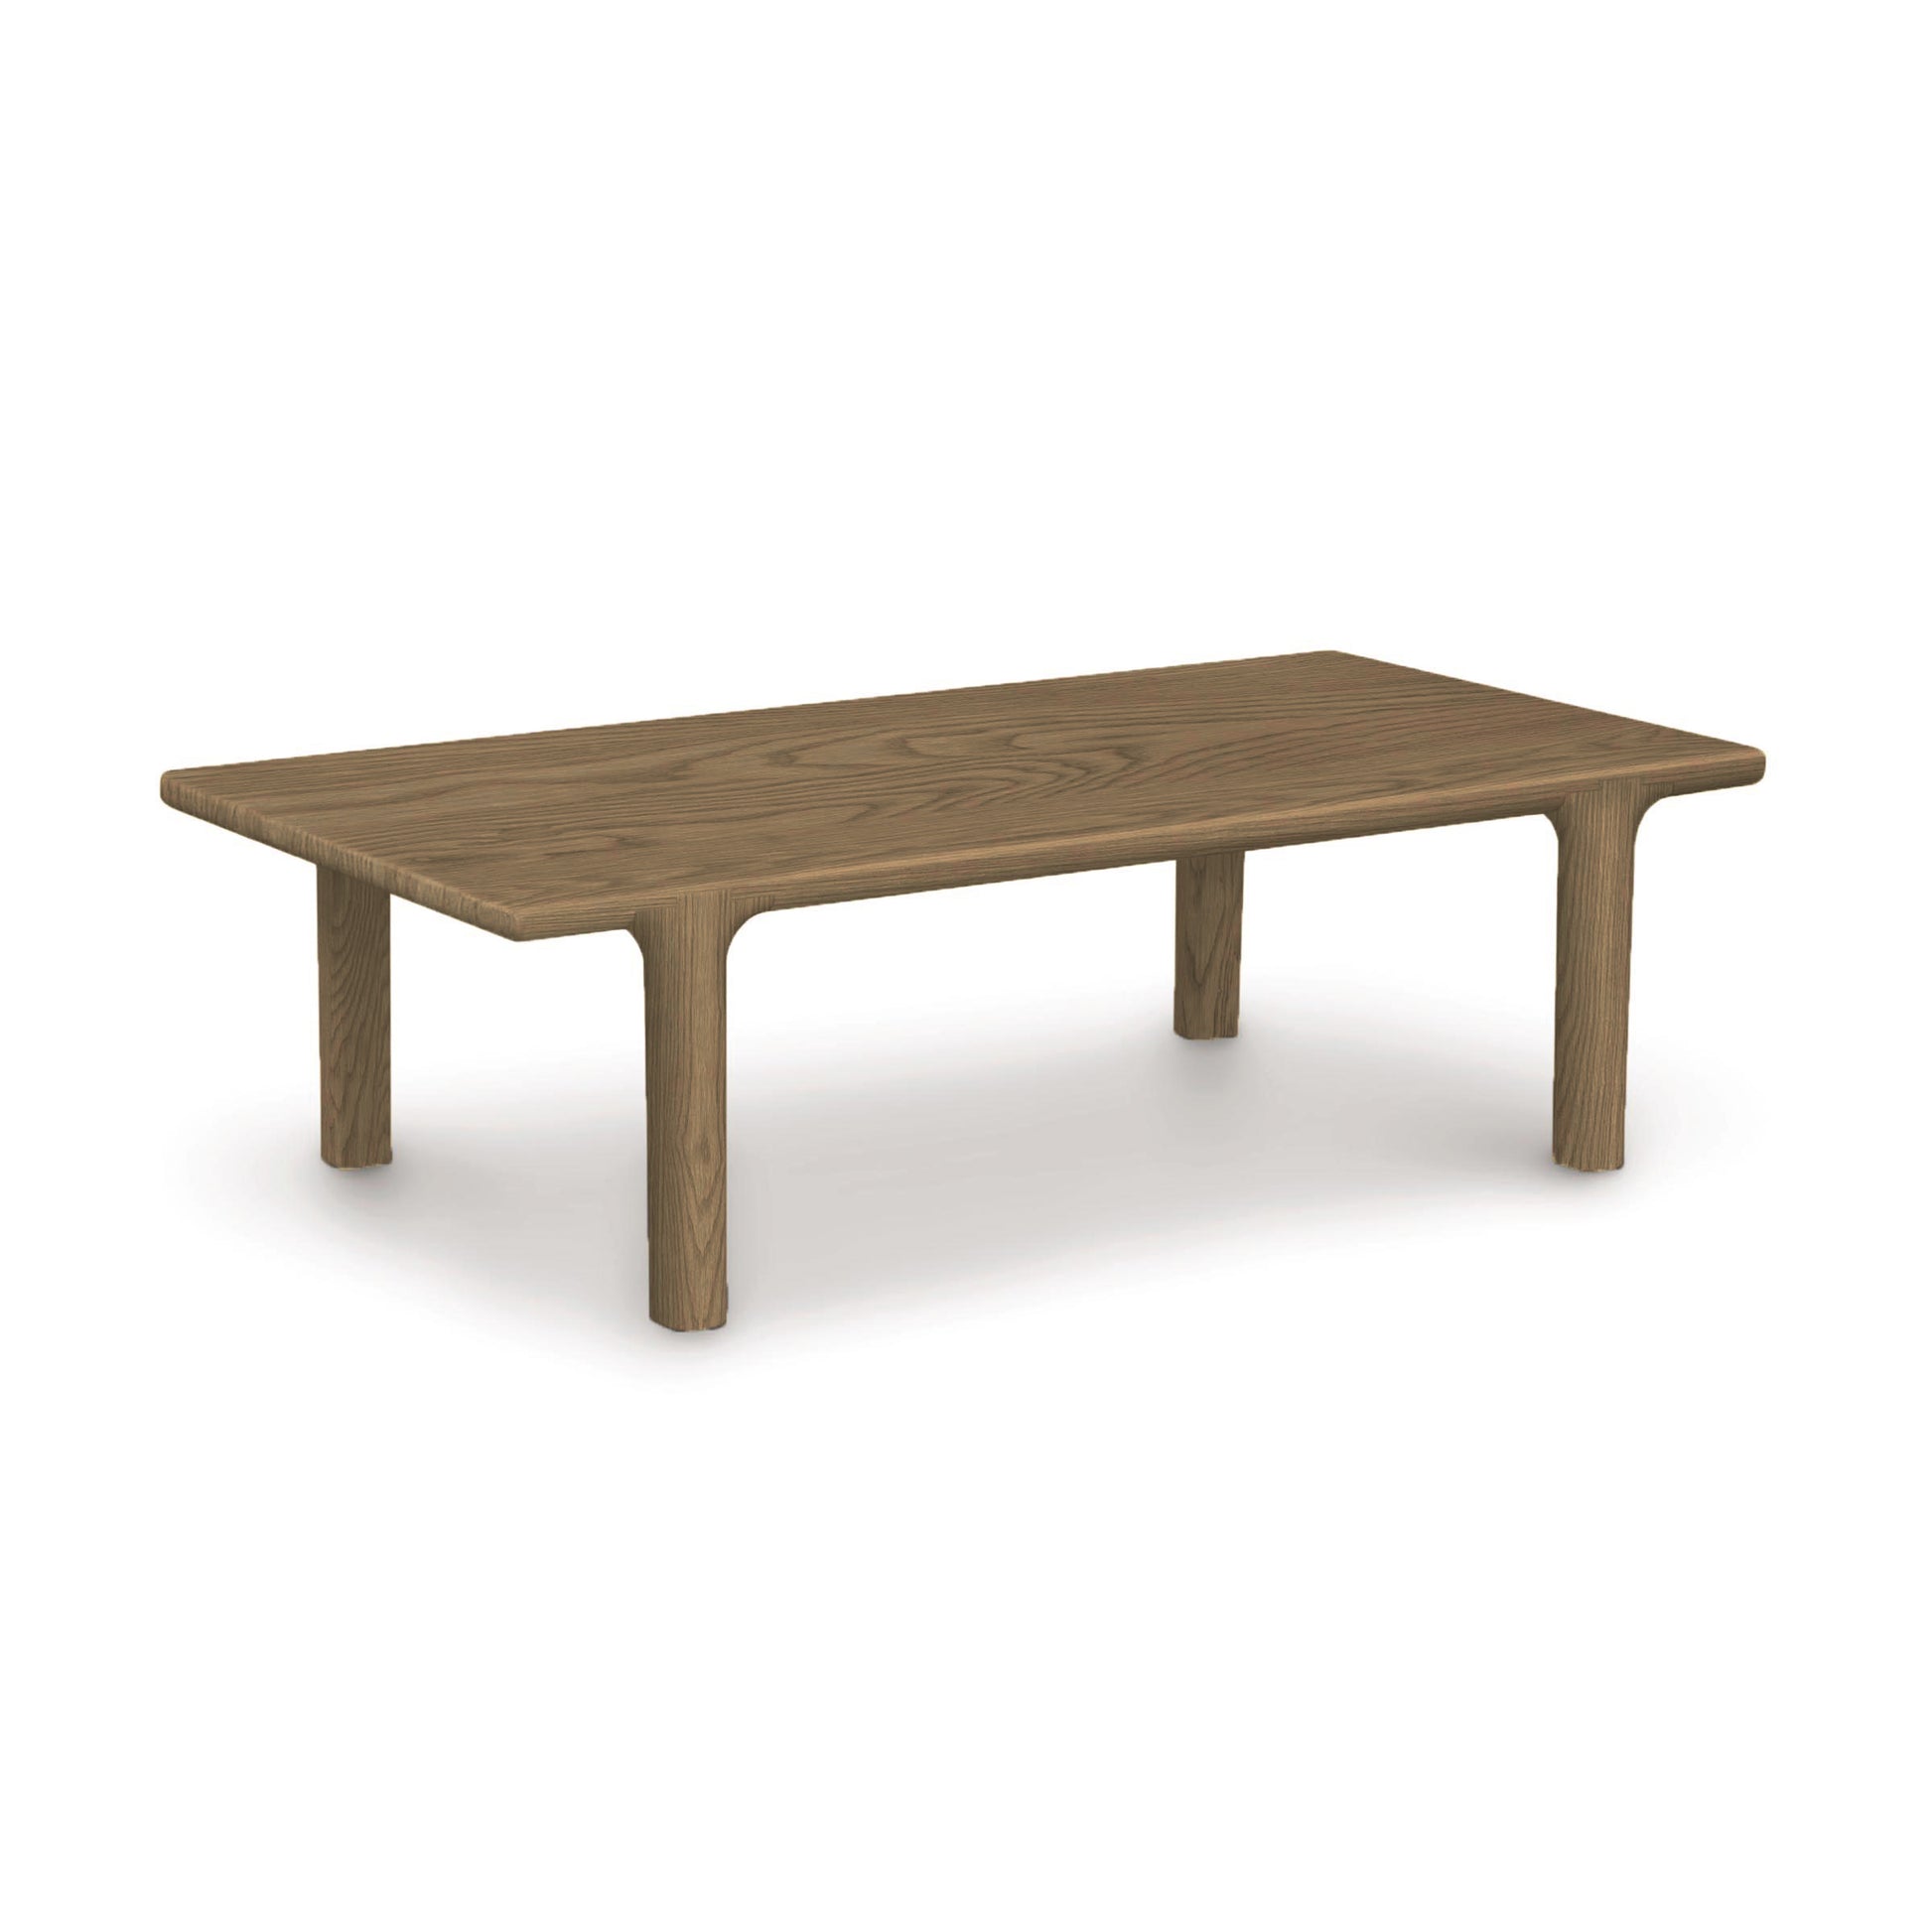 A solid Copeland Furniture Sierra Rectangular Coffee Table with a simple design and four legs on a white background.